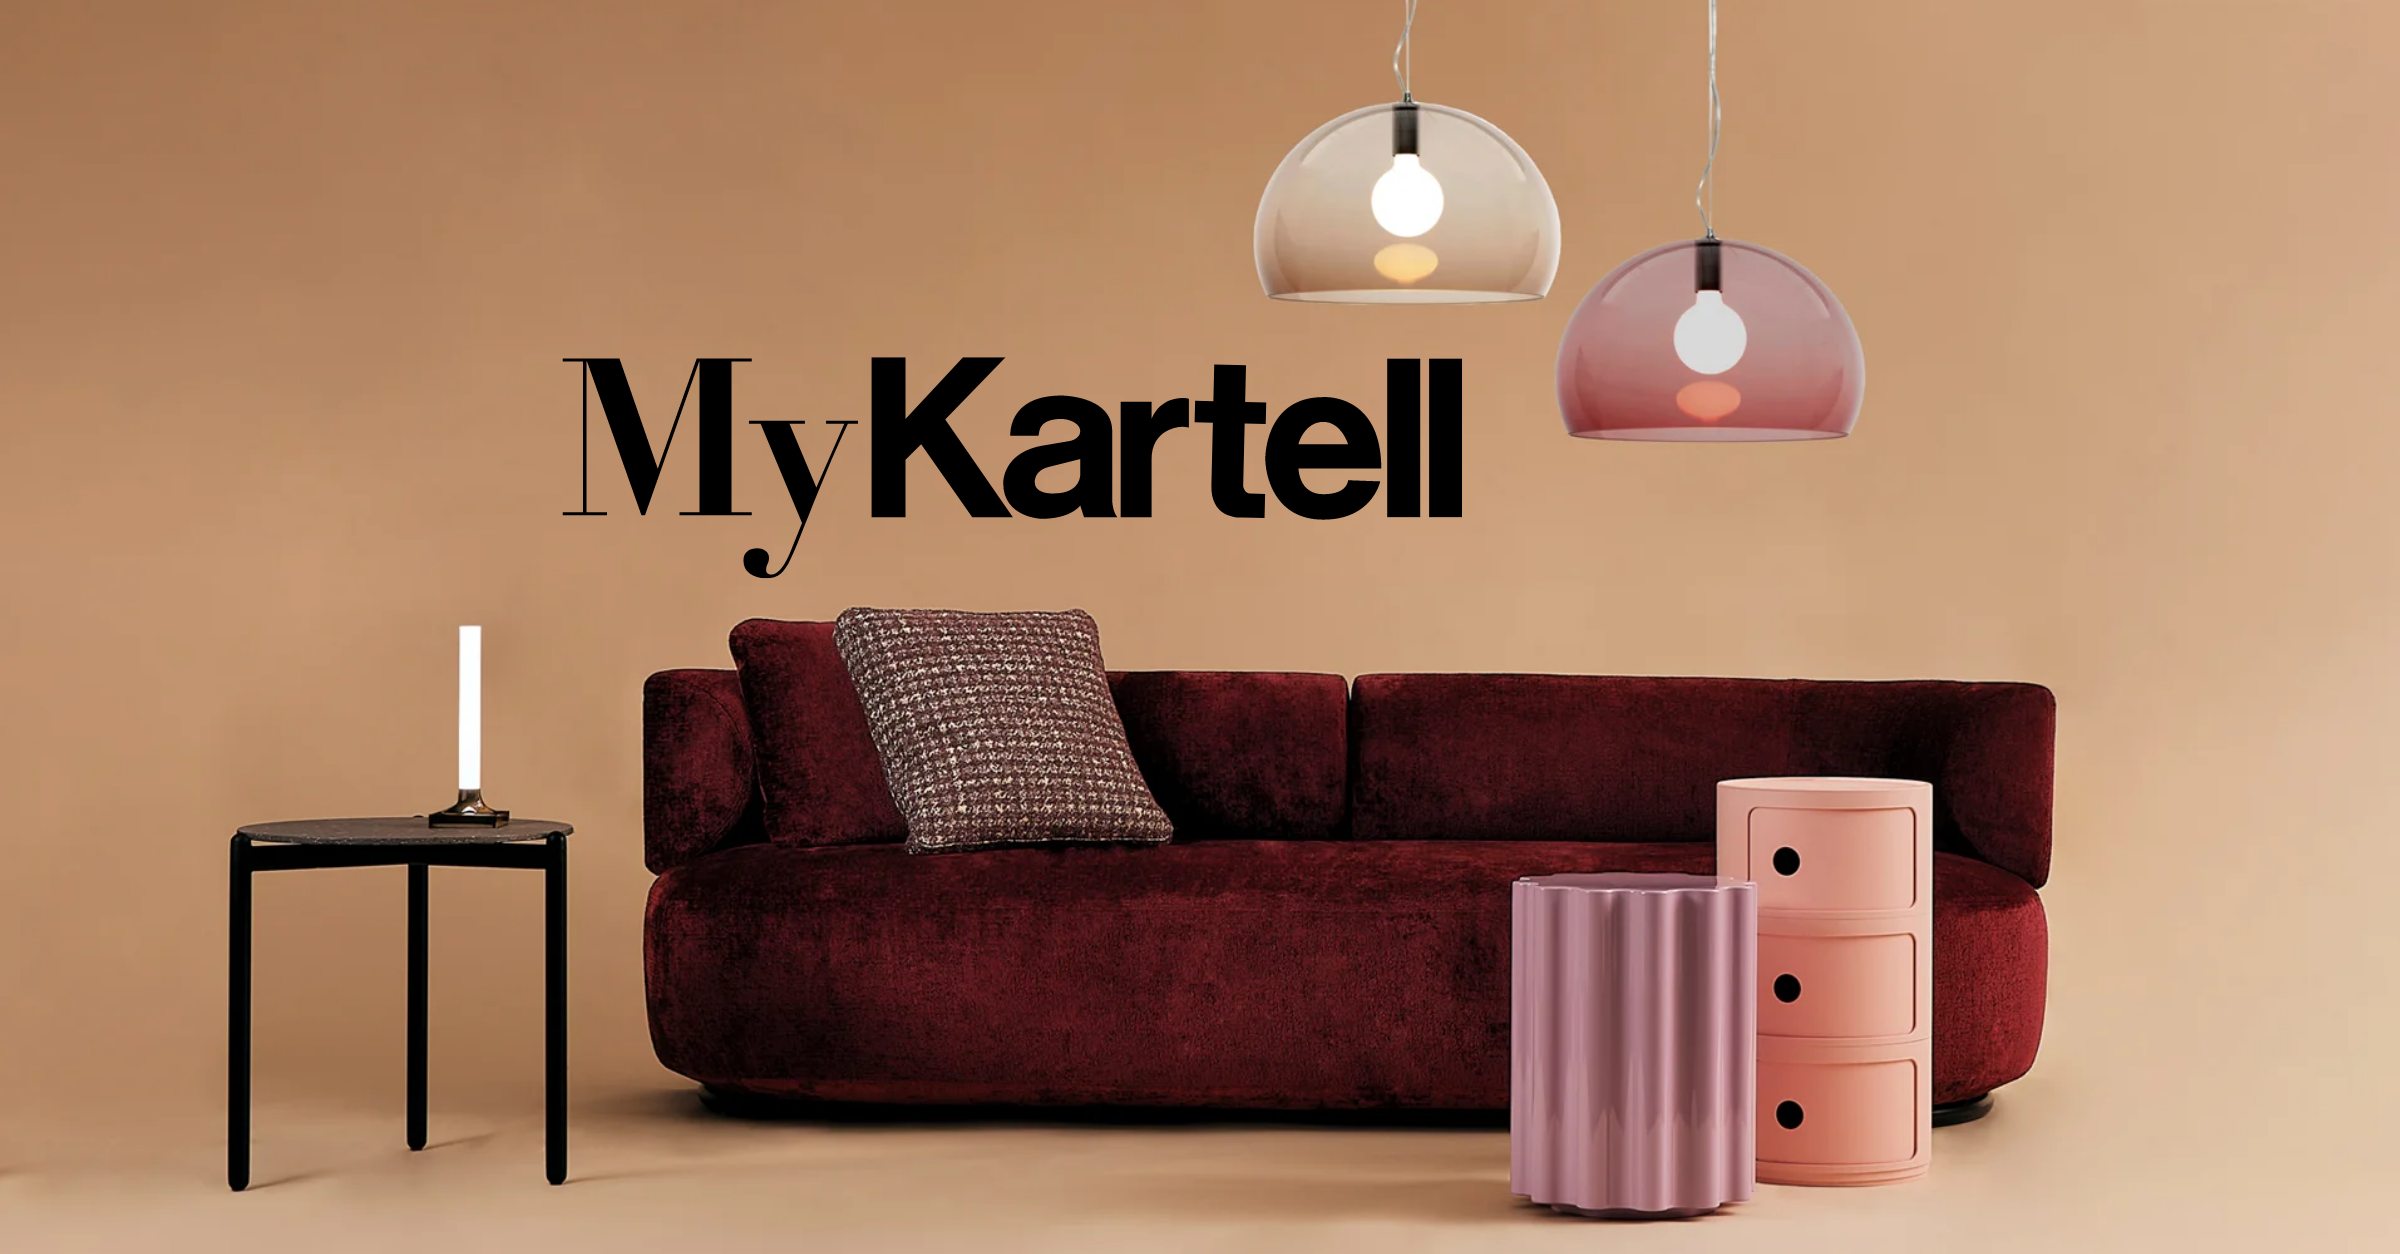 Kartell - For your cozy moments and for your conviviality ones. A.I. chair  fits any corner of your home. #kartell #artificialintelligence #research  #design #madeinitaly #madeinmilan #kartelllovestheplanet #sustainability  #newmaterial #recycled